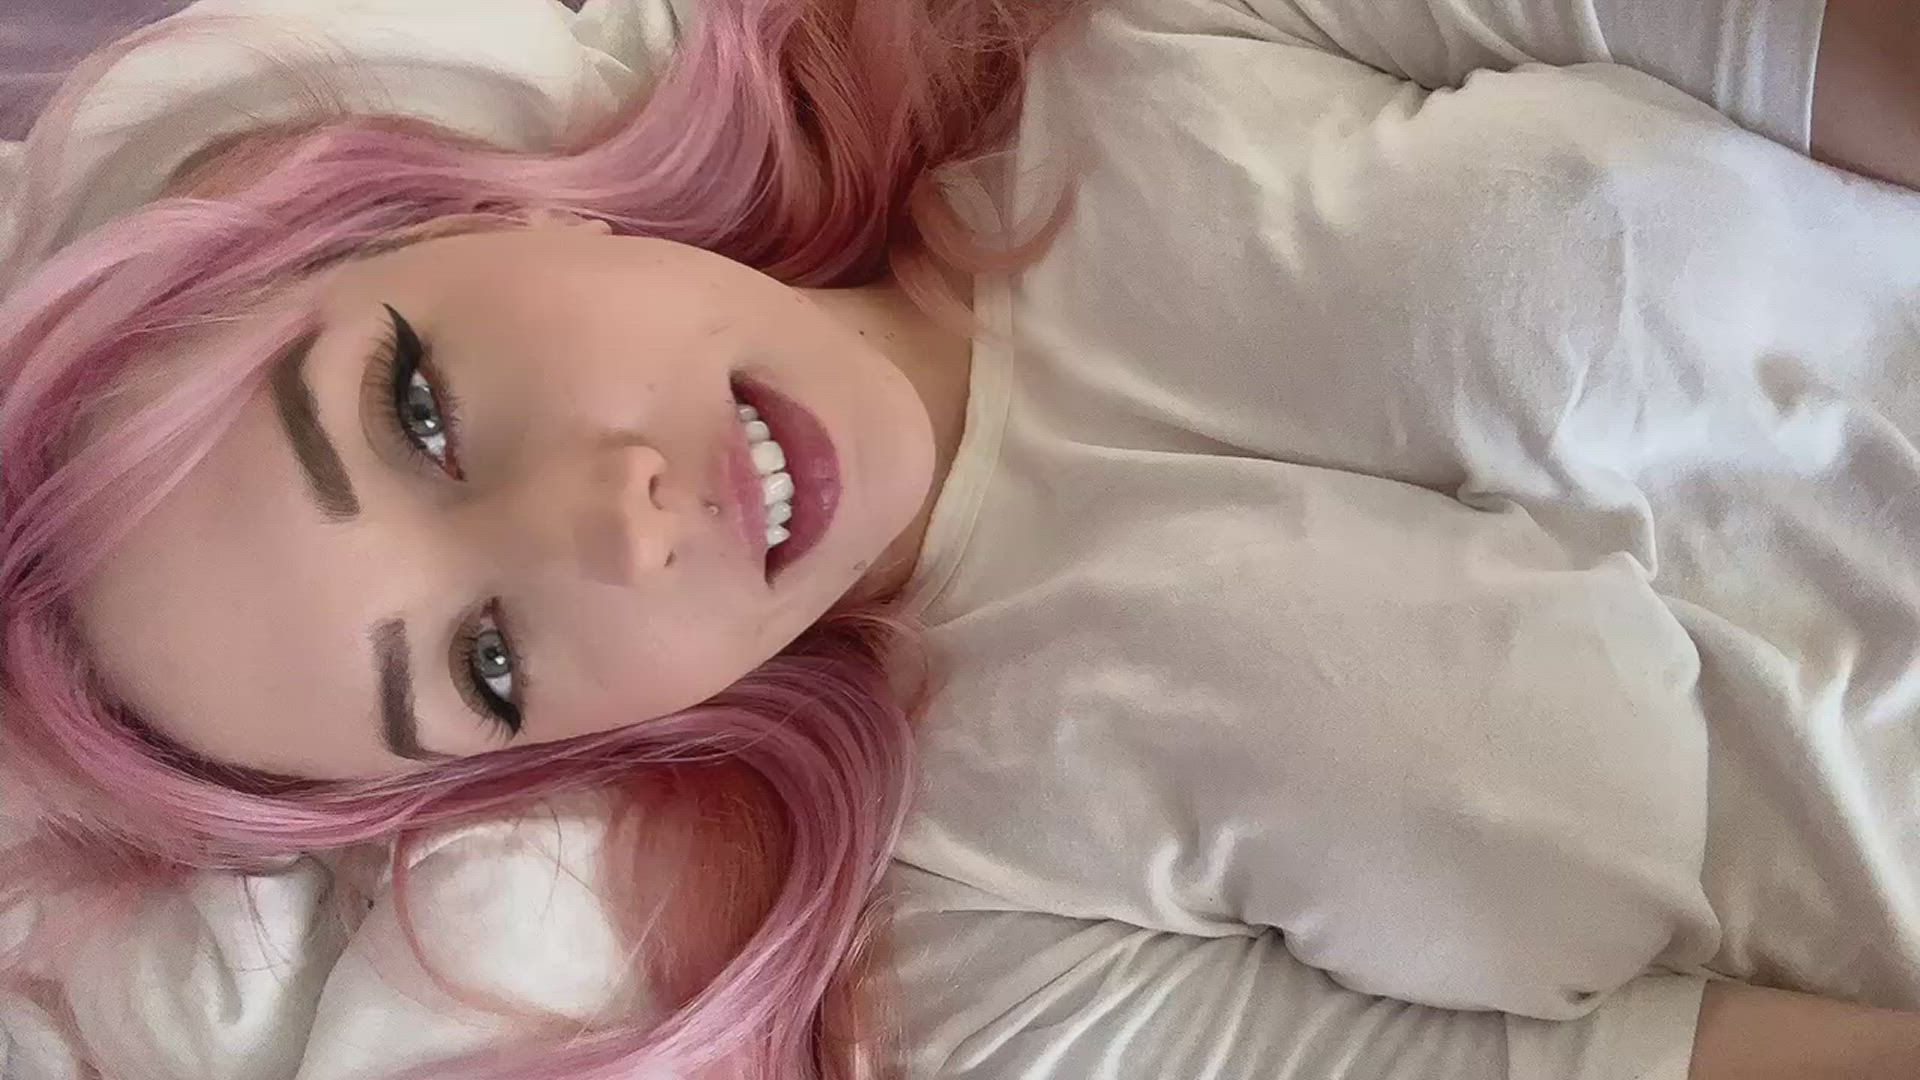 Ahegao porn video with onlyfans model Roseisdeadagain <strong>@roseswickedweb</strong>